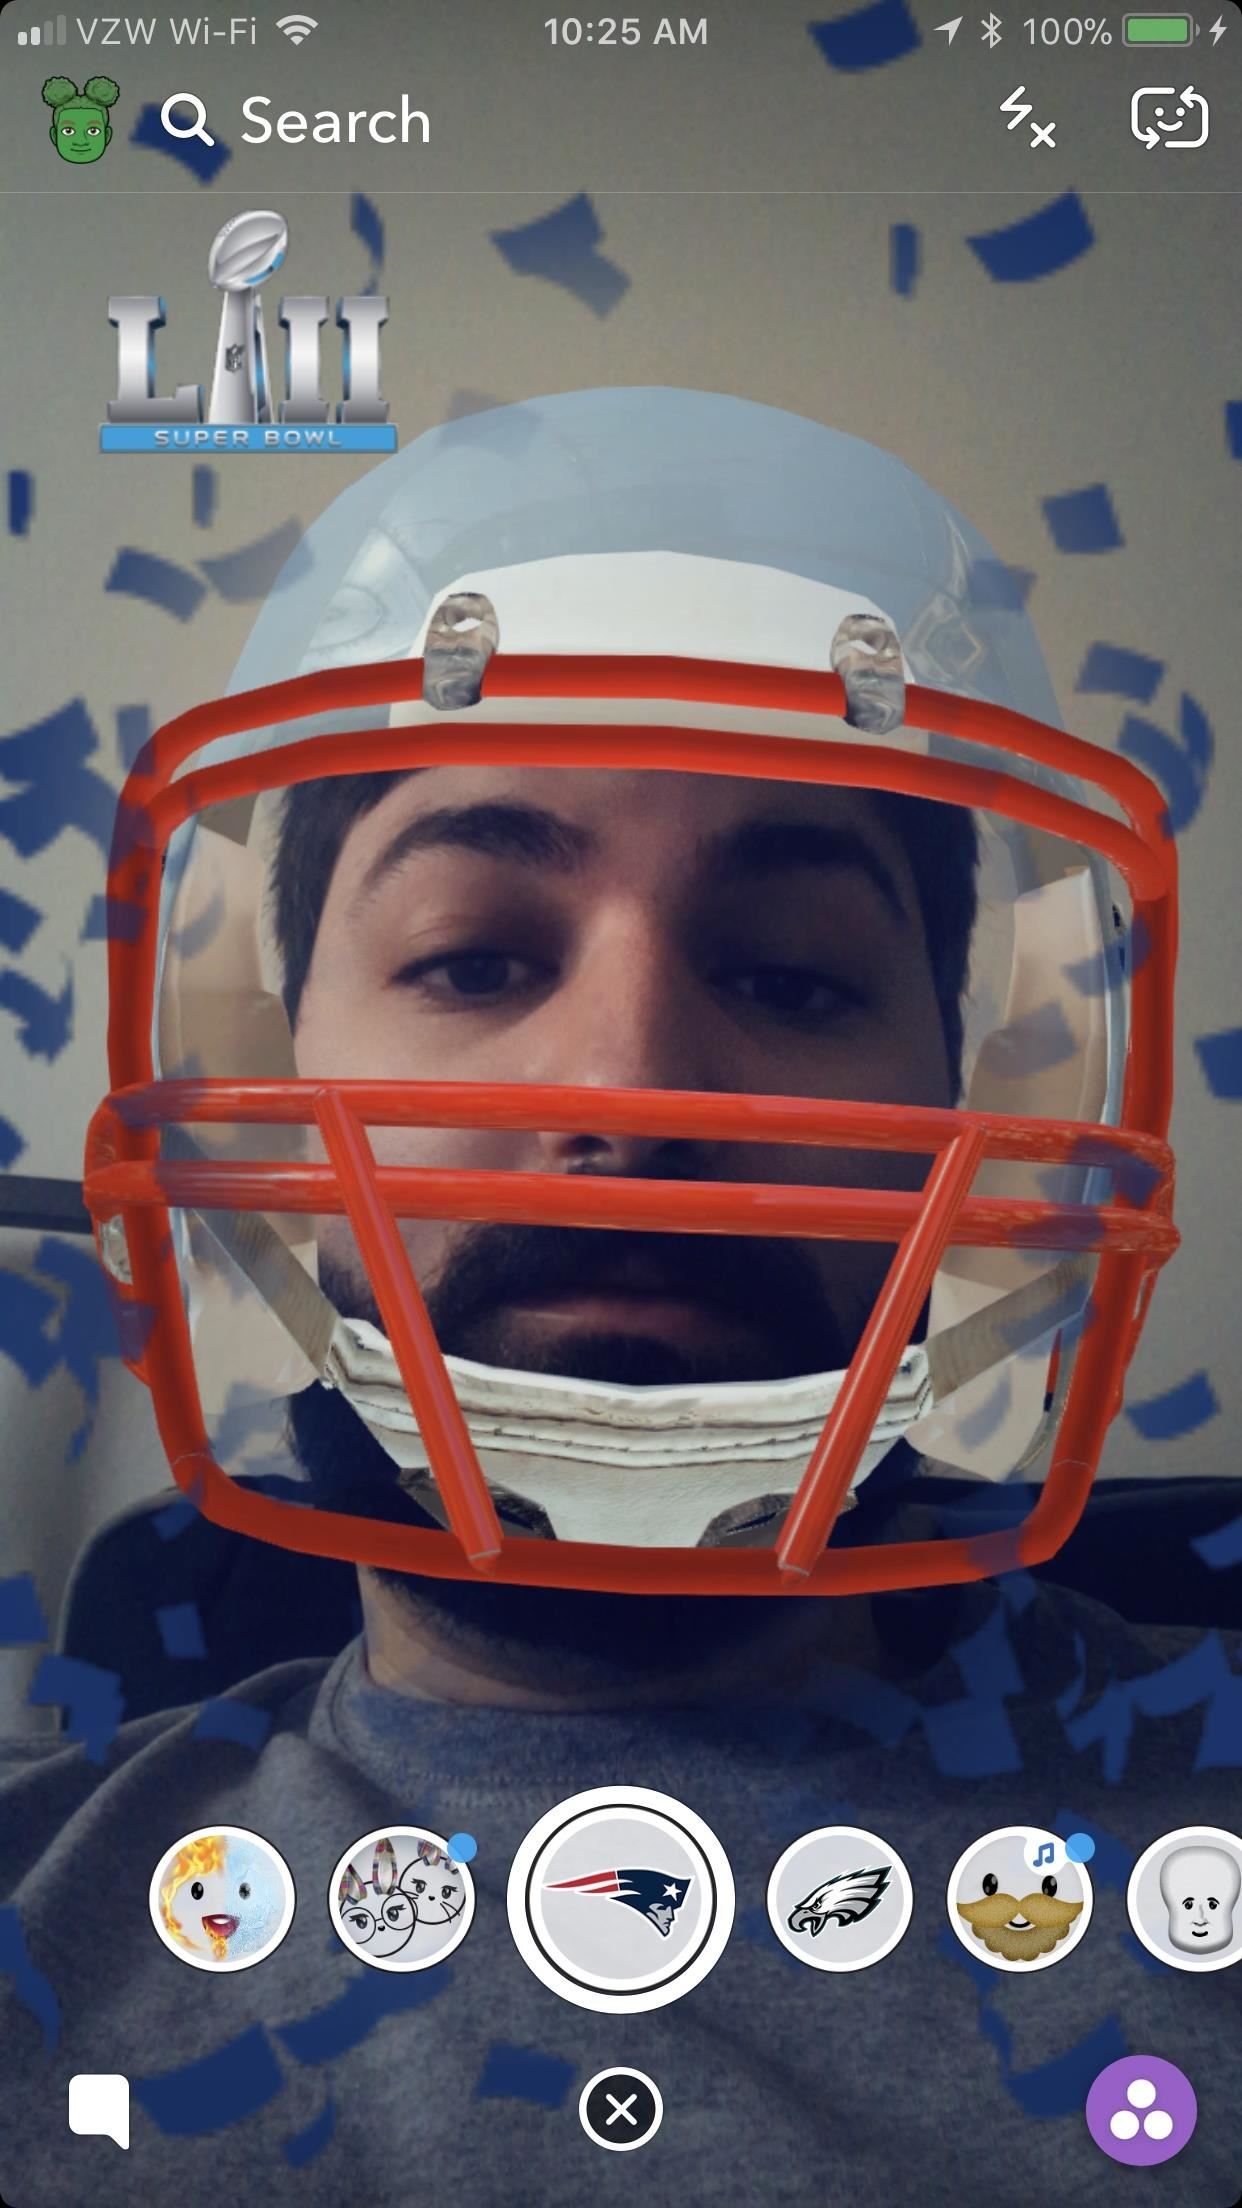 How to Get Snapchat's Super Bowl Filters & Show Your Eagles or Patriots Pride